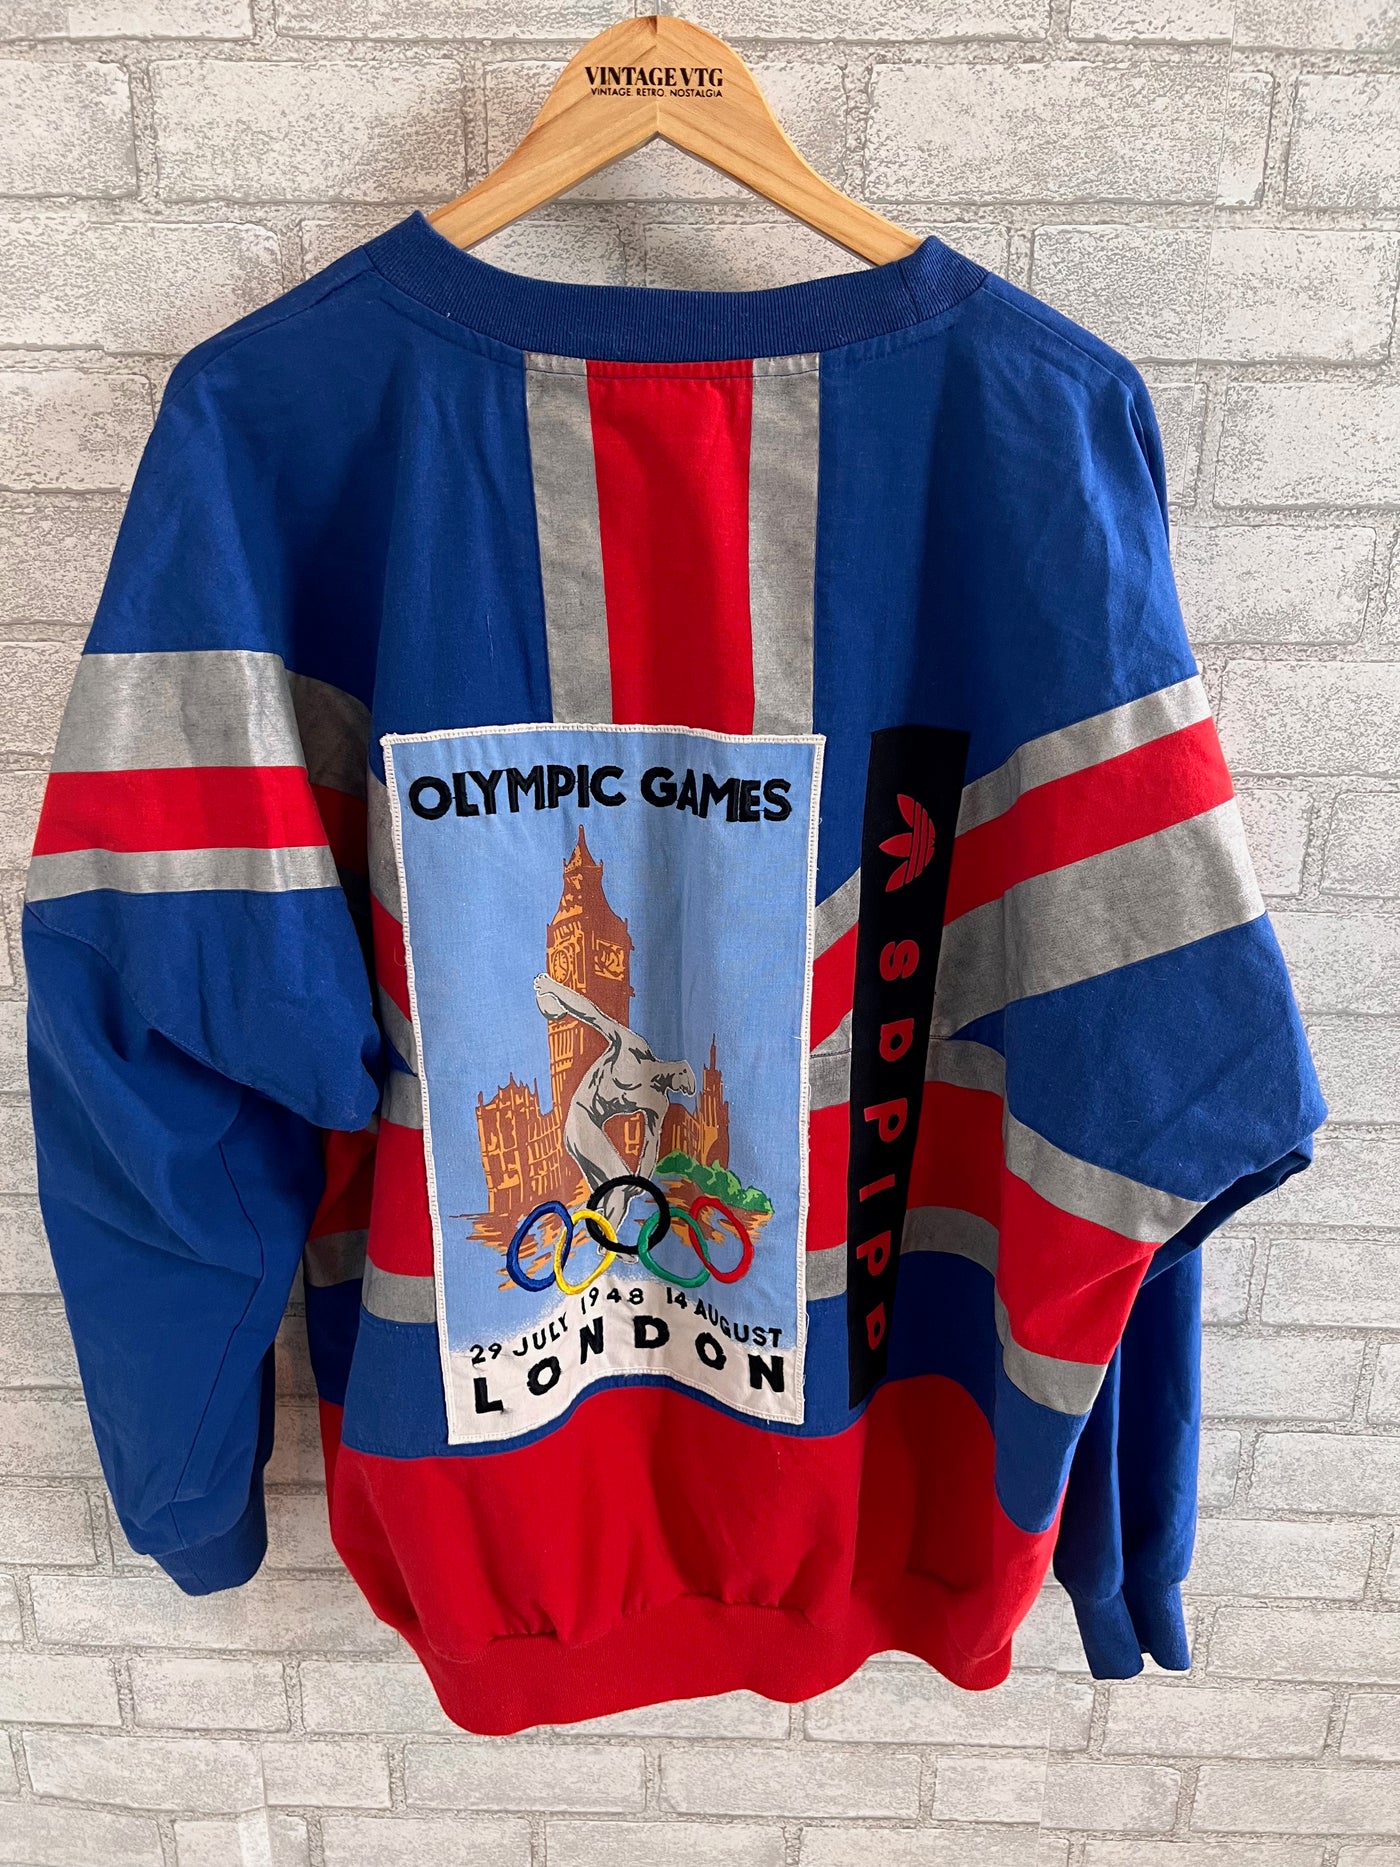 Rare Vintage 80s Adidas 1908 1948 London Olympics Men's Pullover sweatshirt. Blue and red. Large